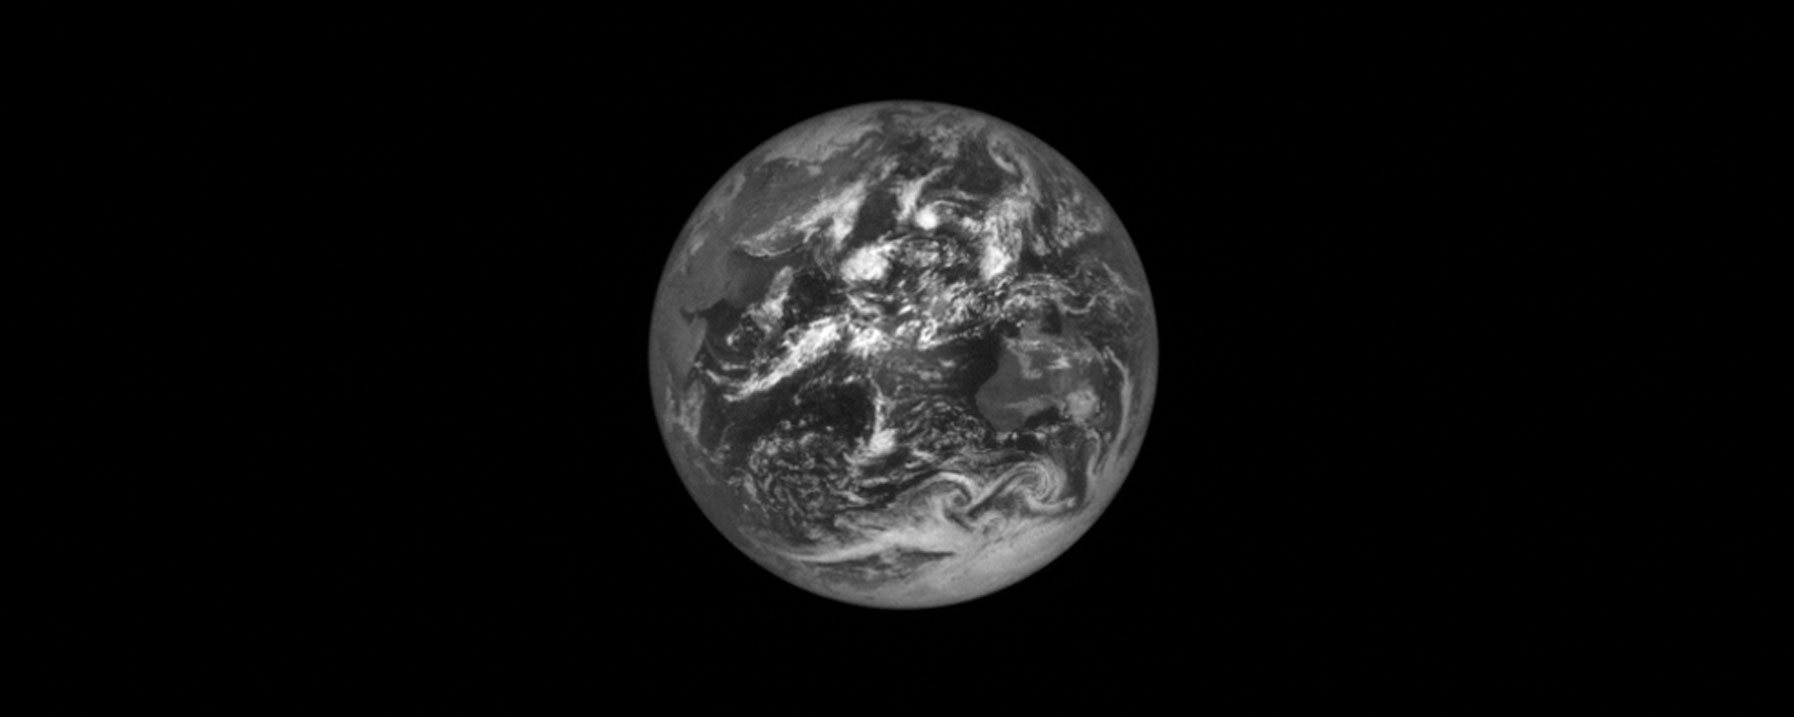 Black and White Photo of the Earth Taken from Lucy